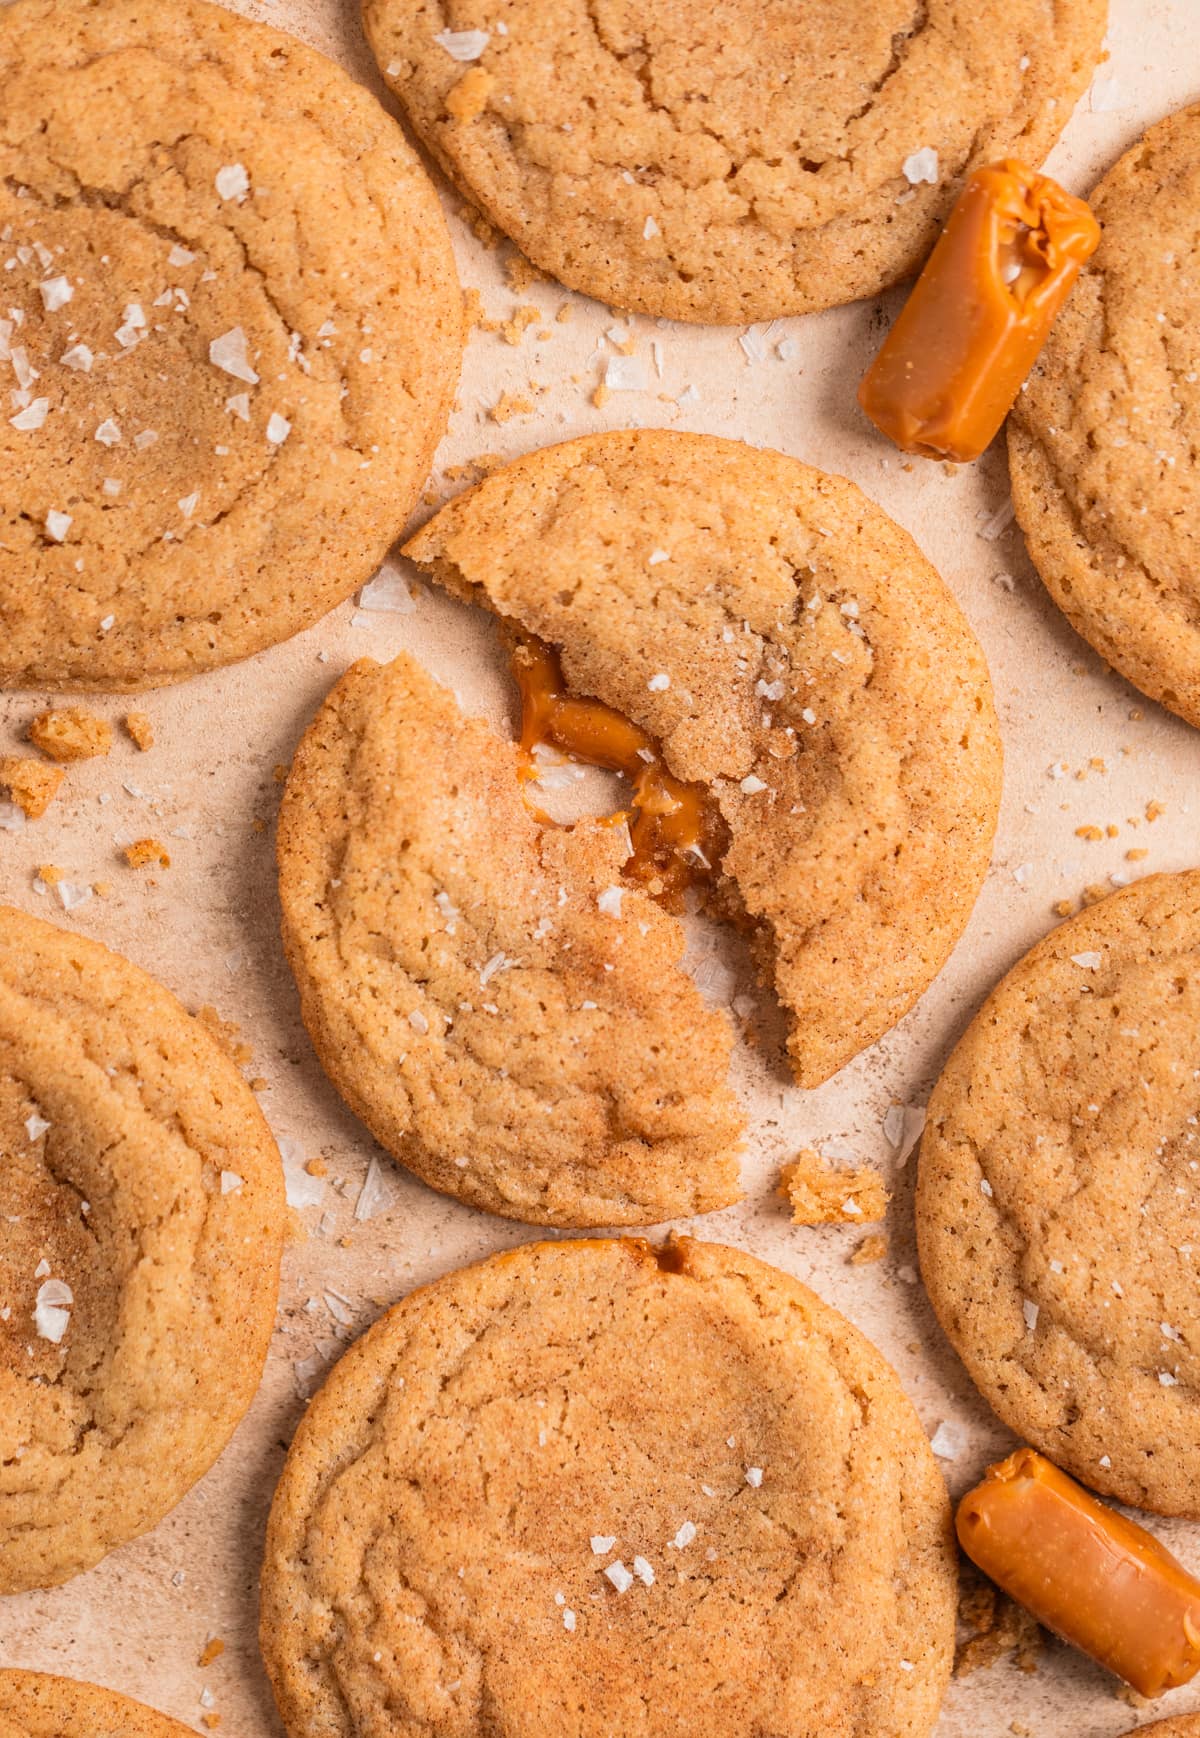 Caramel stuffed snickerdoodle cookies arranged on surface with sea salt sprinkled over top.